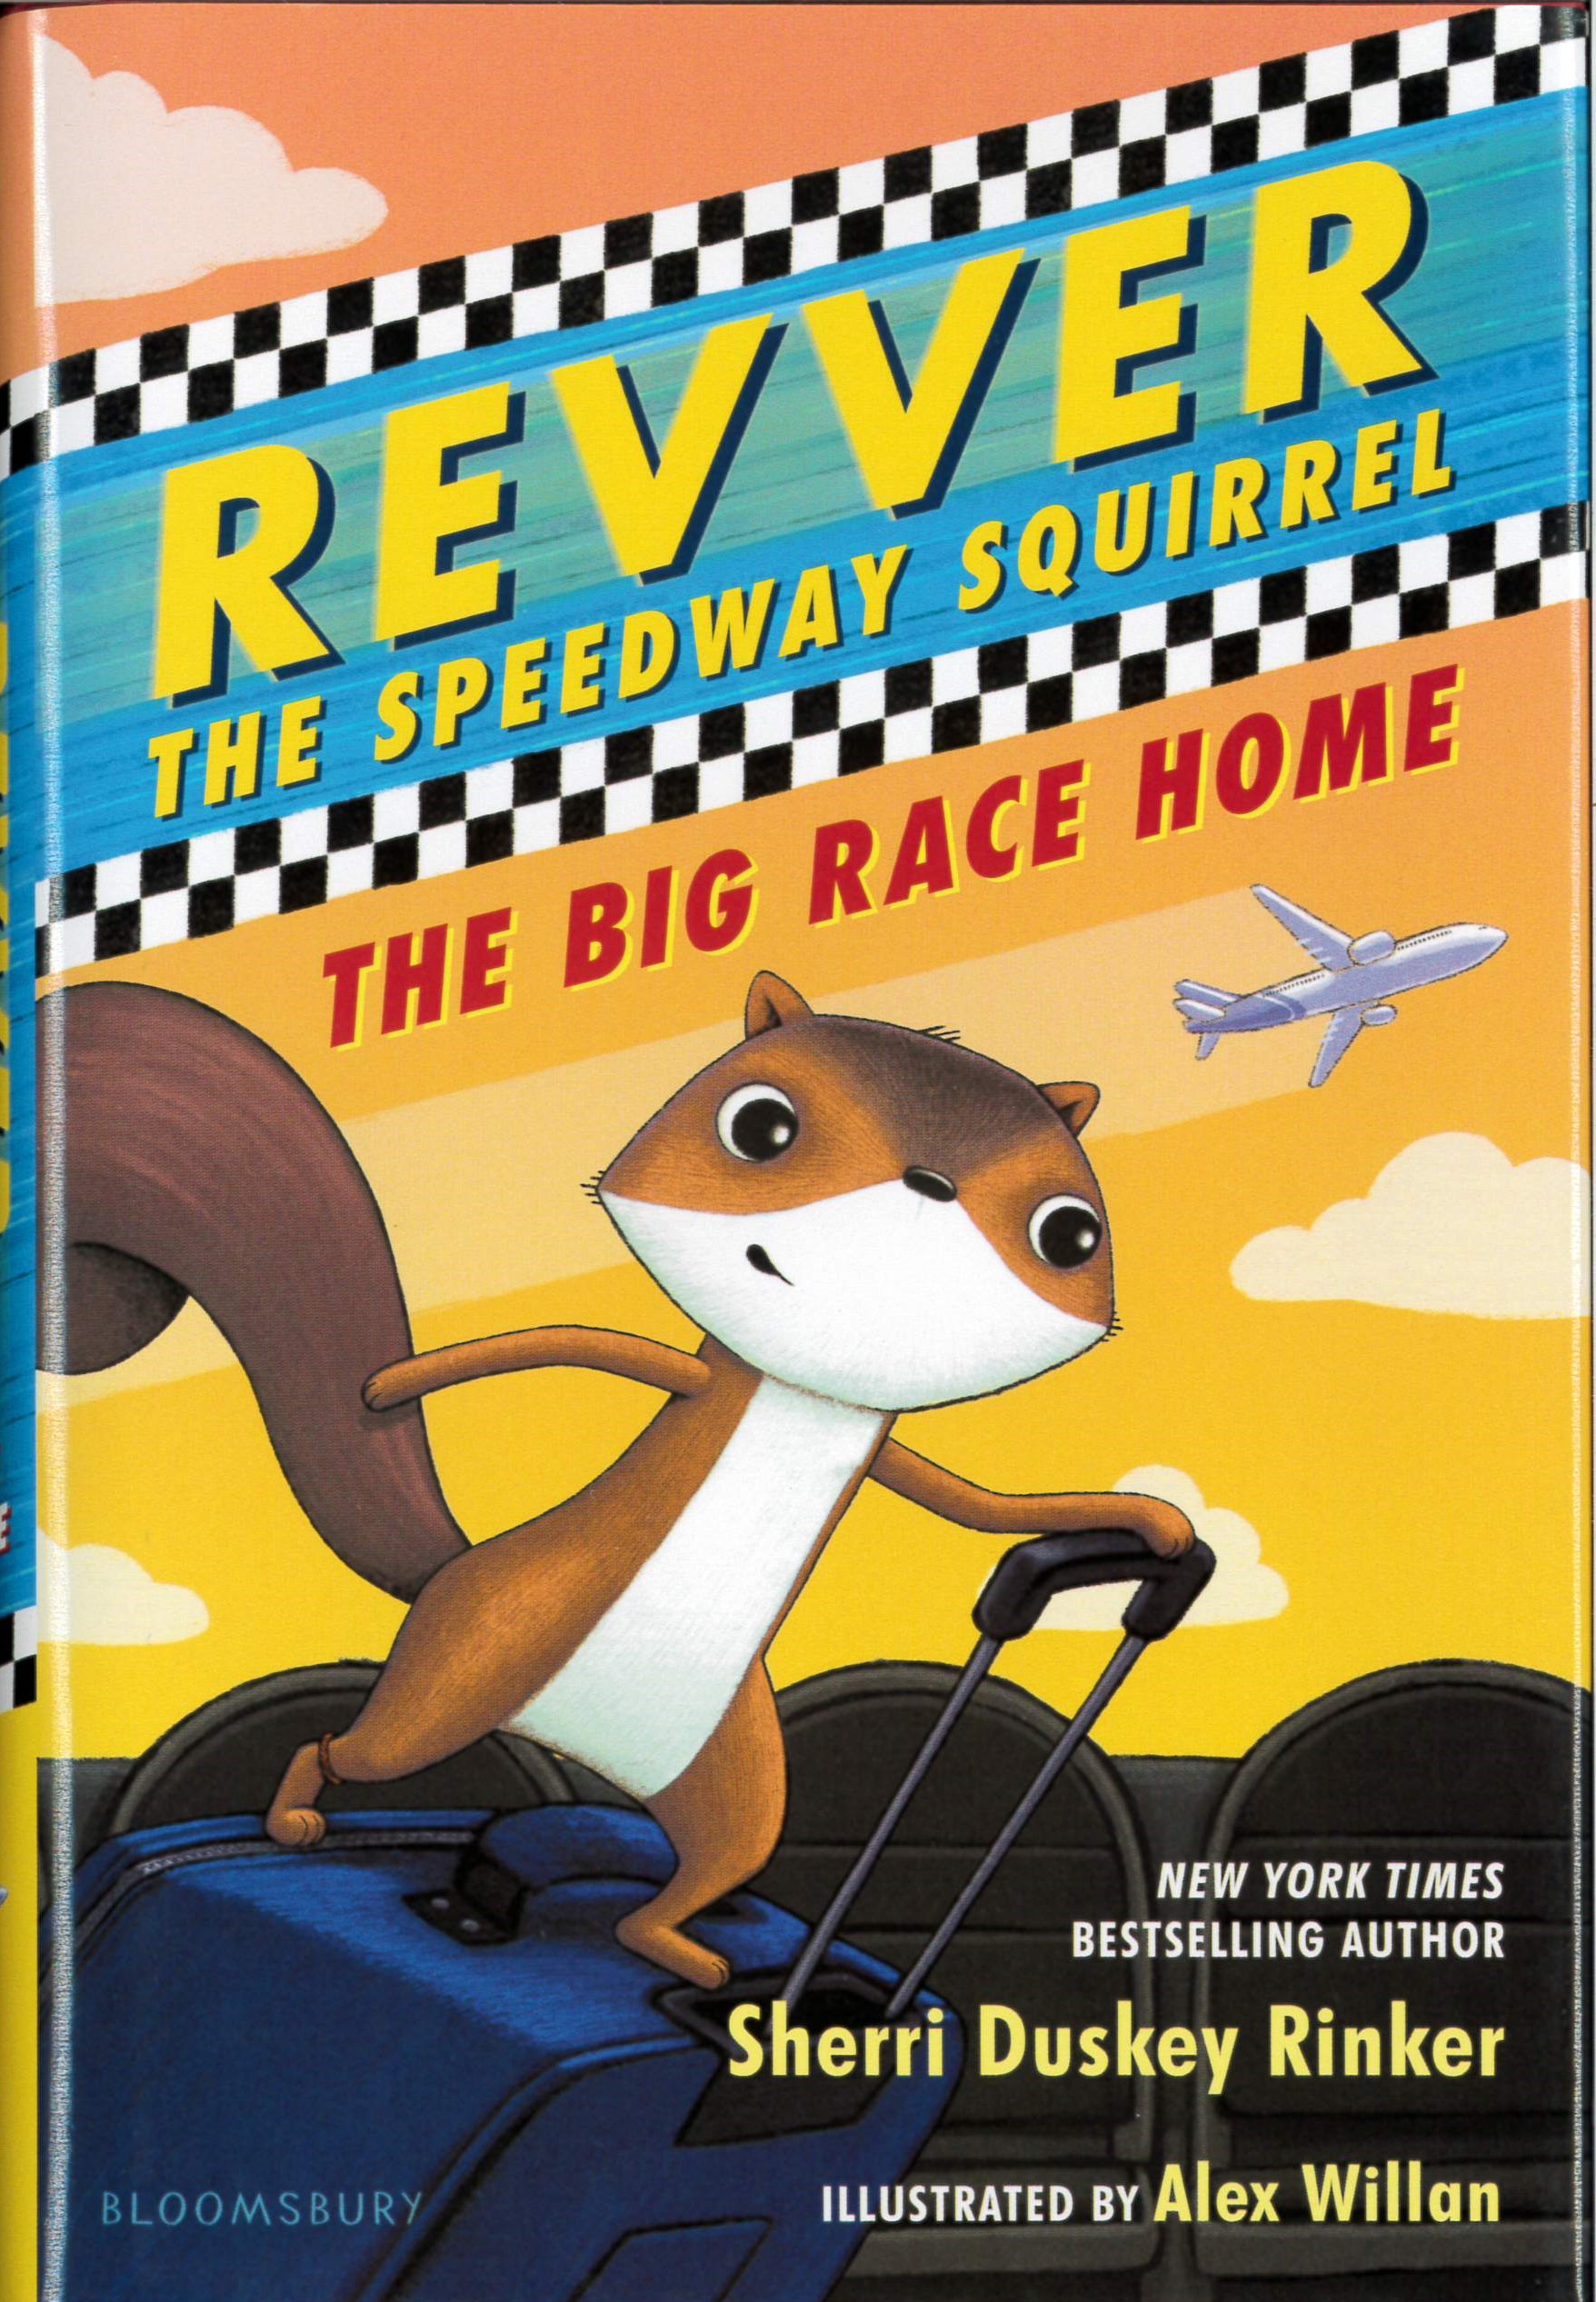 Revver the speedway squirrel(2) : the big race home /